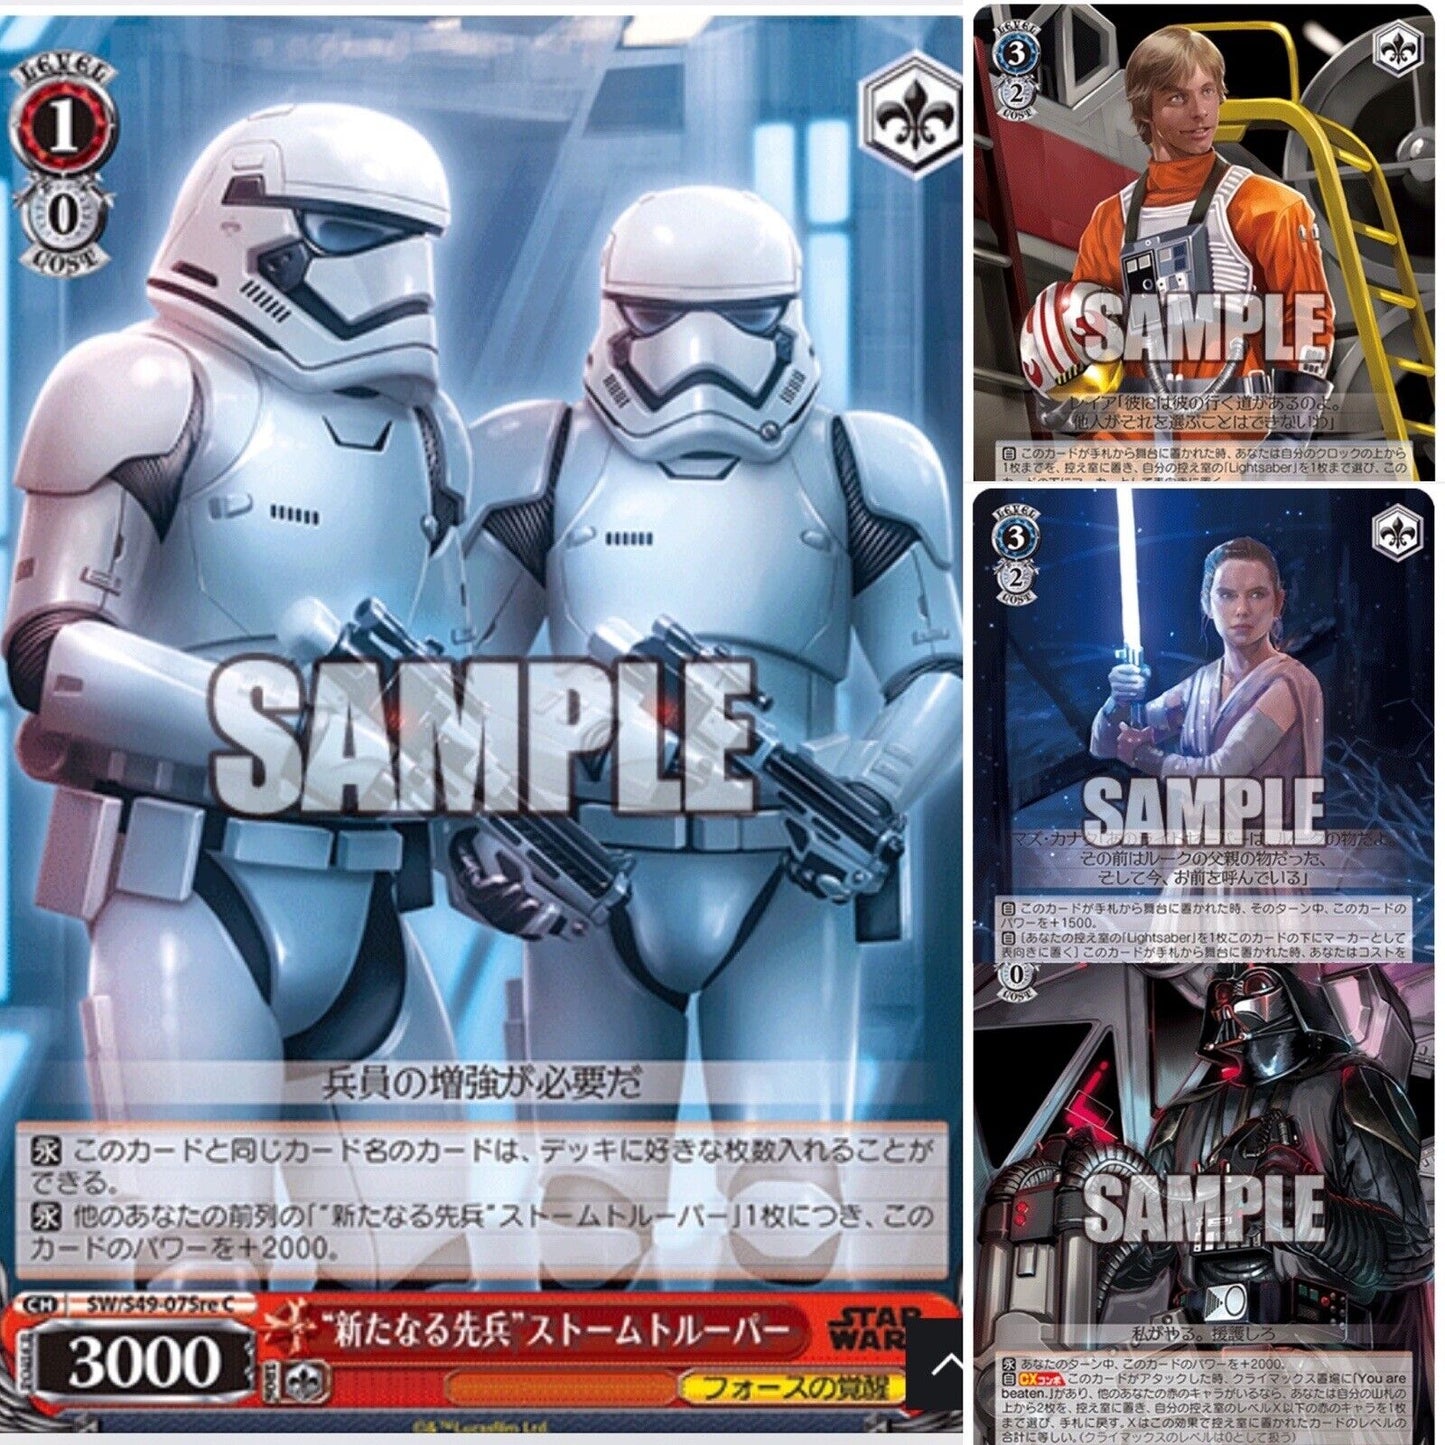 Sealed Case(18 Boxes) Come Back Weiss Schwarz STAR WARS Japanese Free Shipping